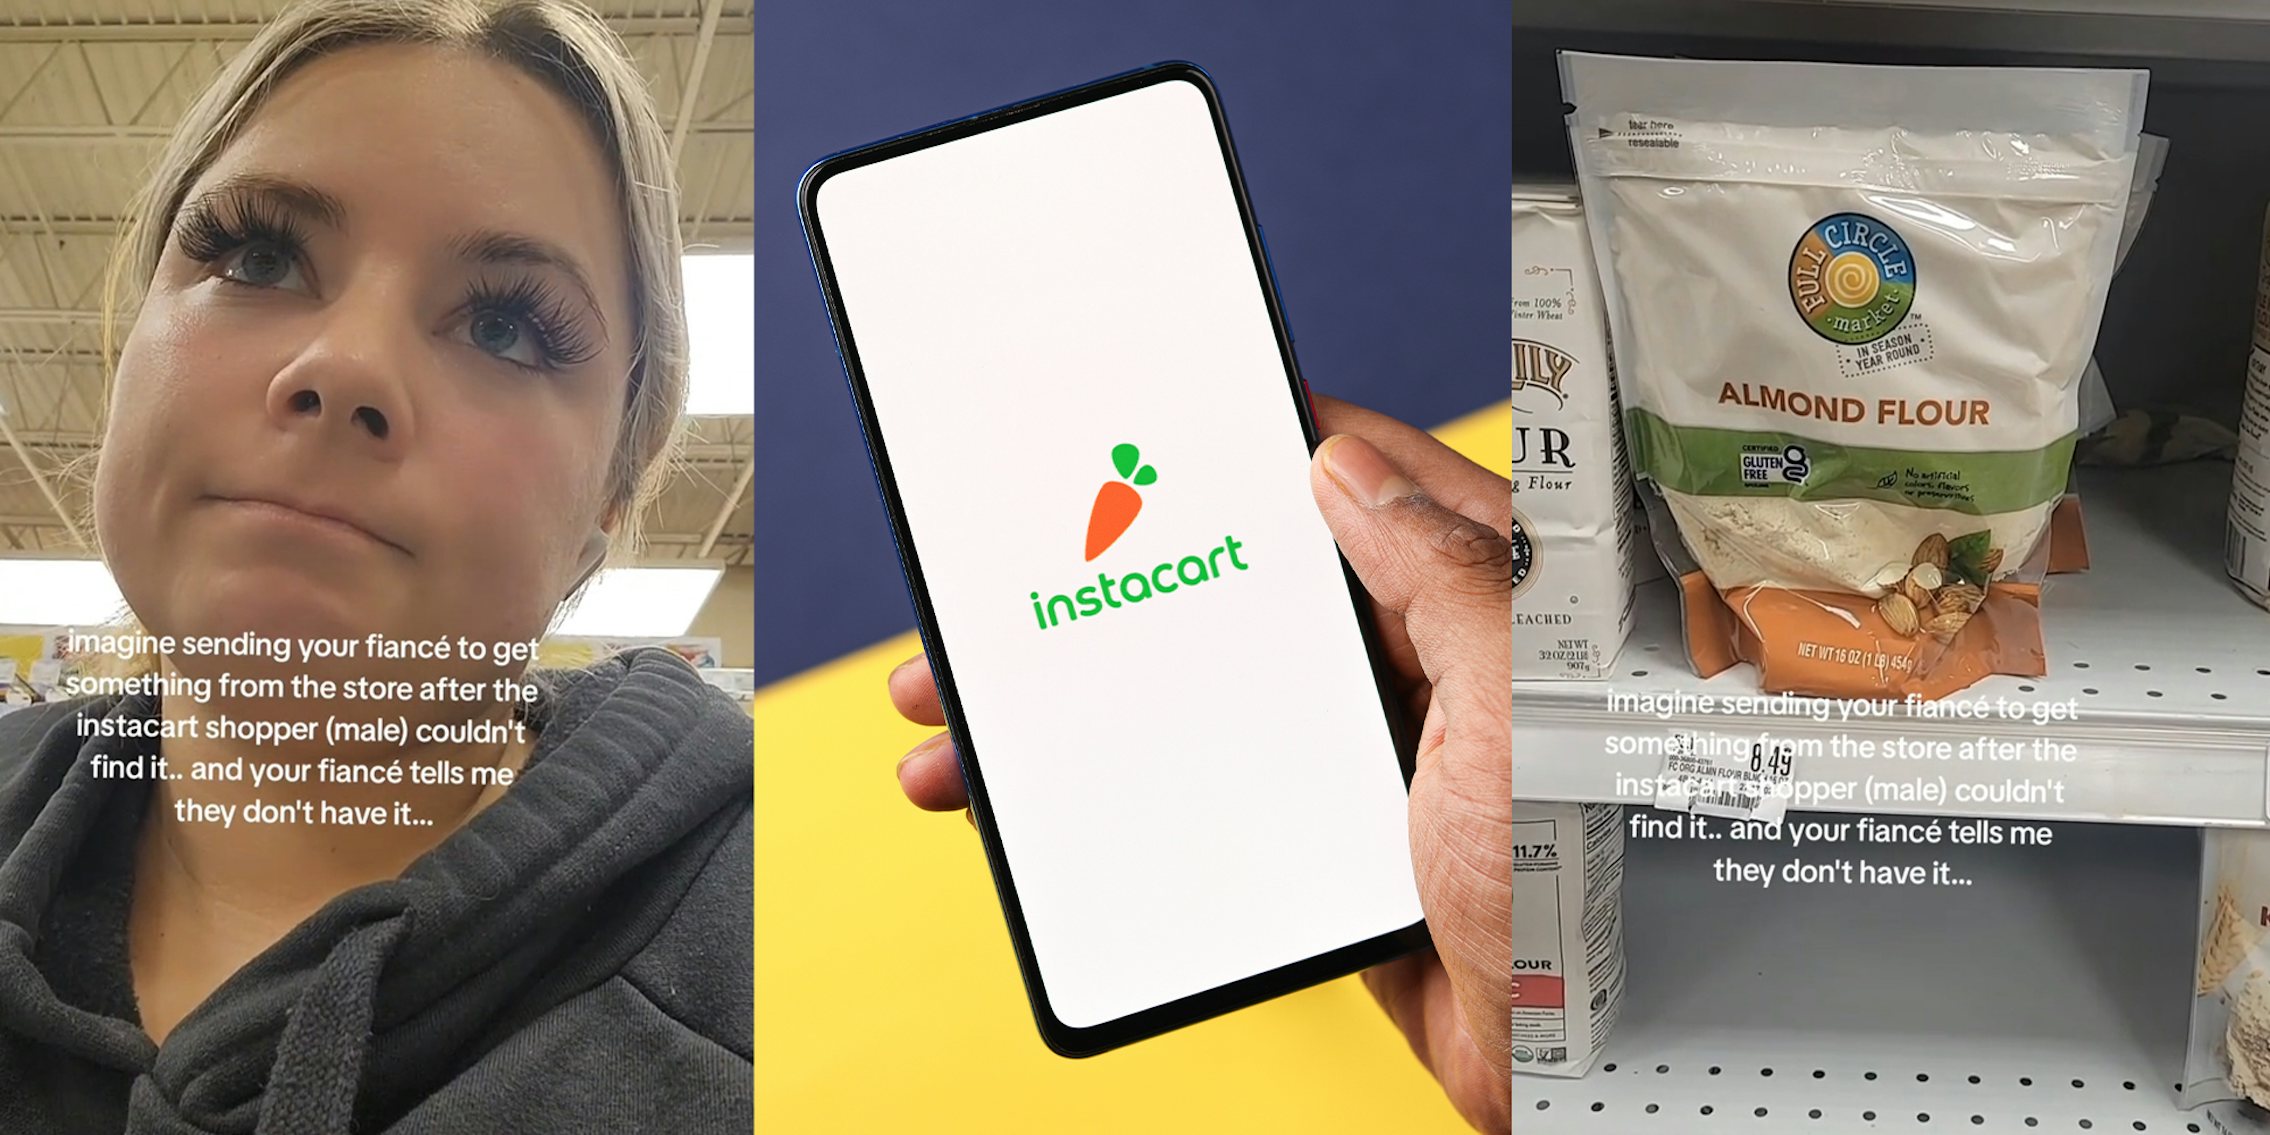 woman in store; hand holding phone with Instacart logo showing; bag of almond flour on shelf